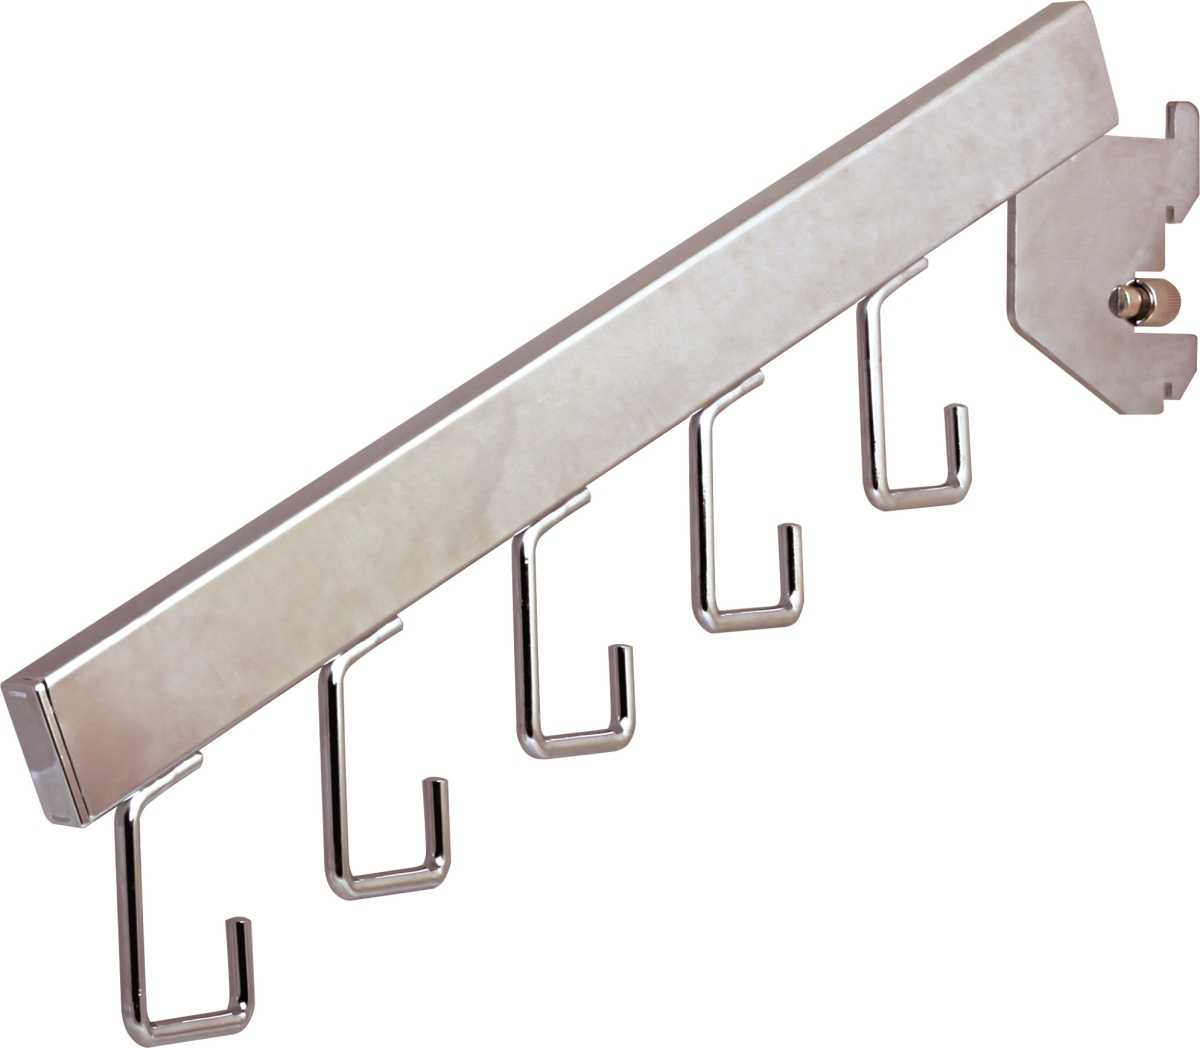 Picture of AMKO RR-5H-CH 5-Hook Waterfall for 1 in. Slot on 2 in. Center, Chrome